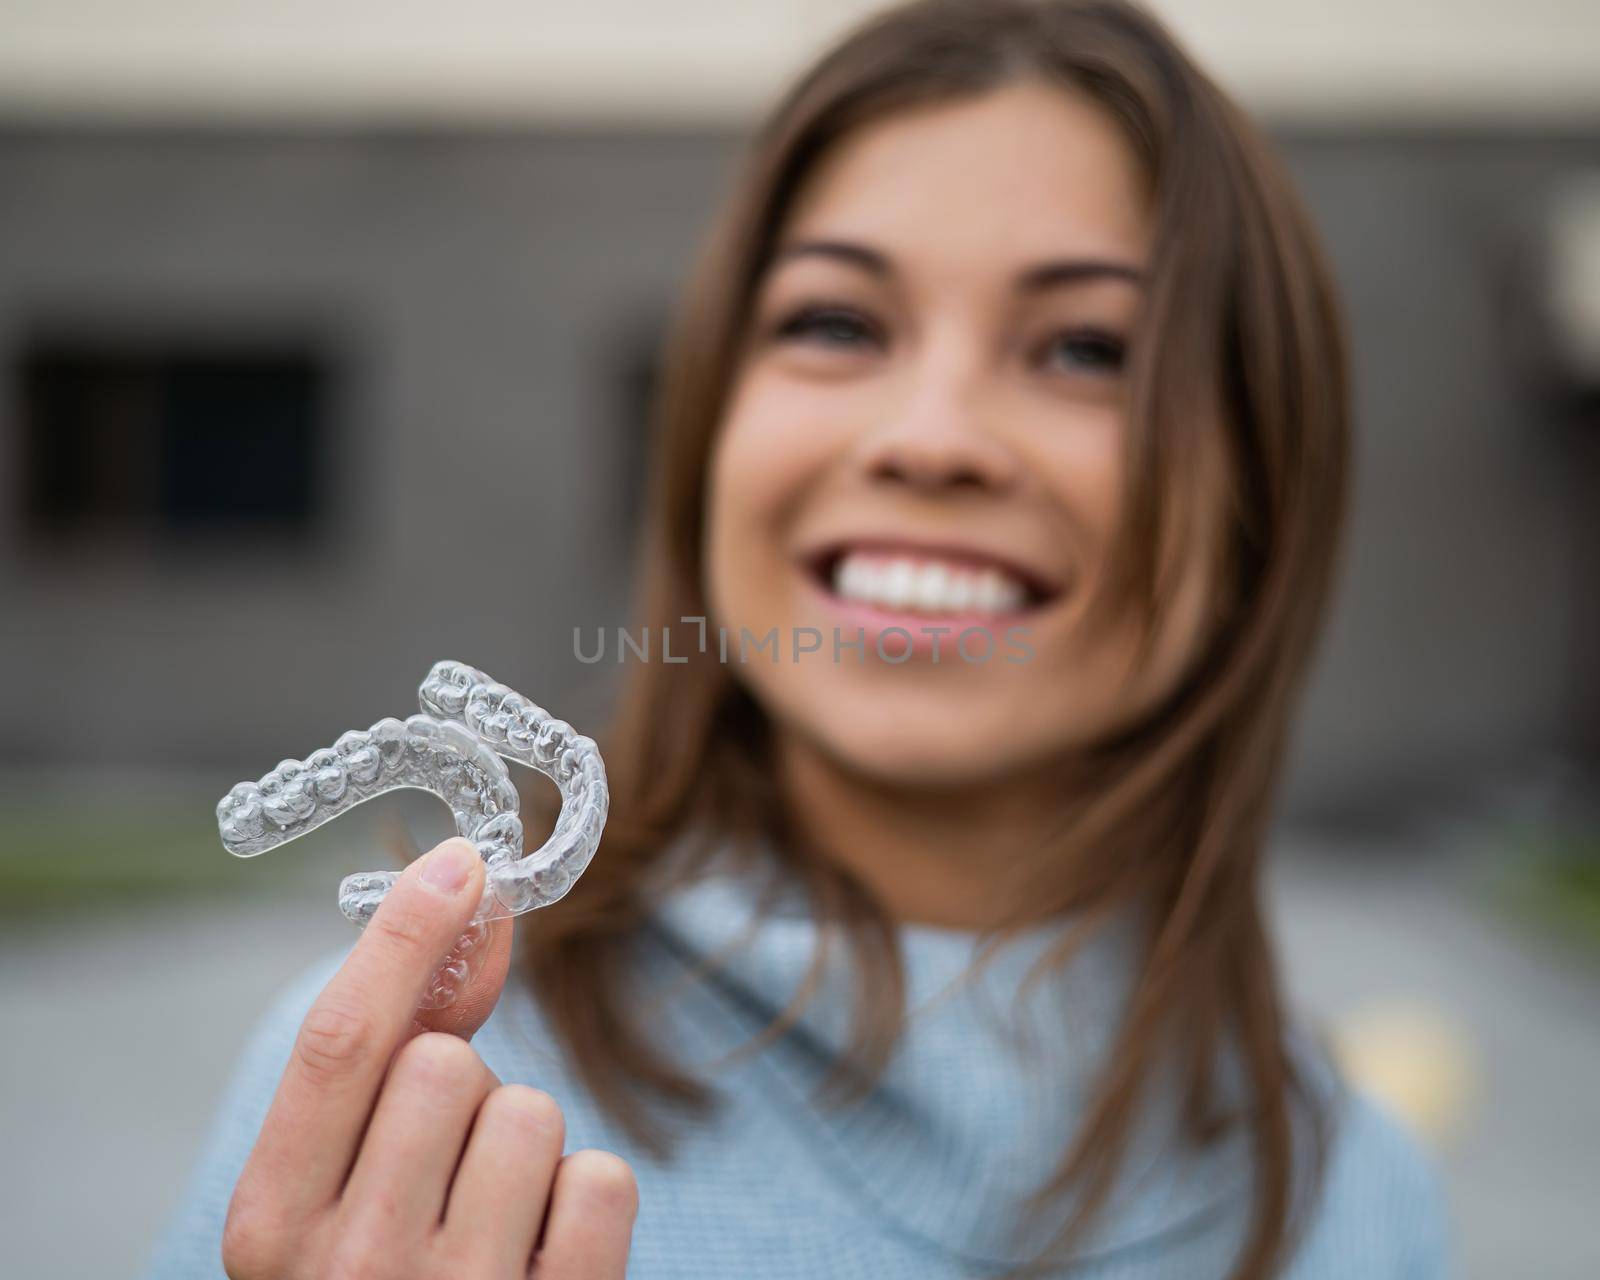 Caucasian woman with white smile holding transparent removable retainer. Bite correction device. by mrwed54